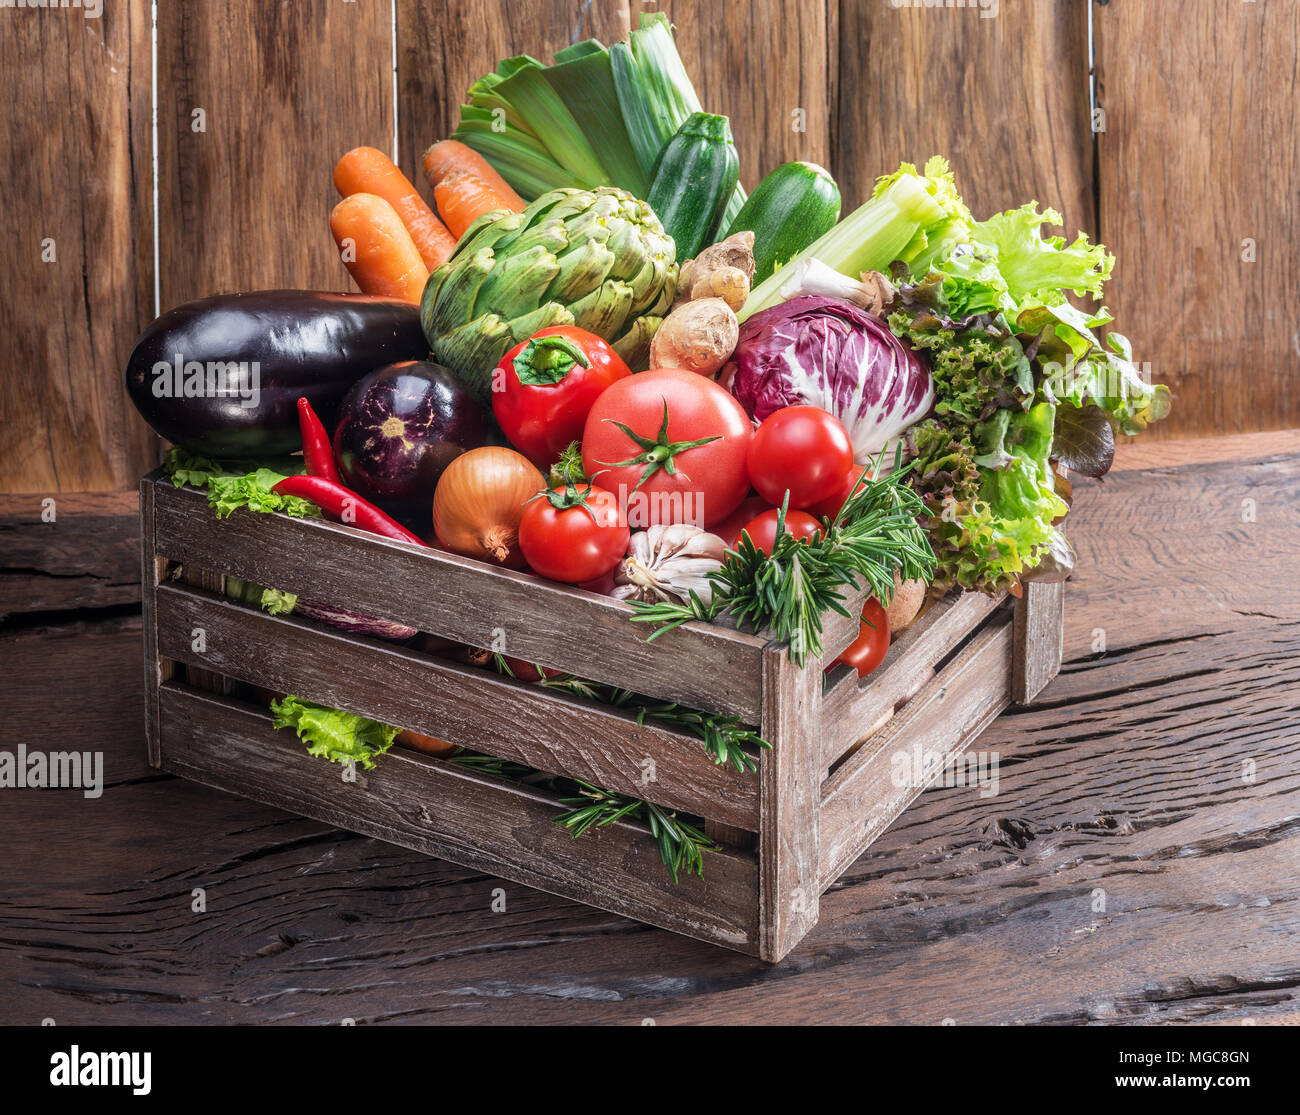 Fresh multi-colored vegetables in wooden crate. Wooden background. Stock Photo